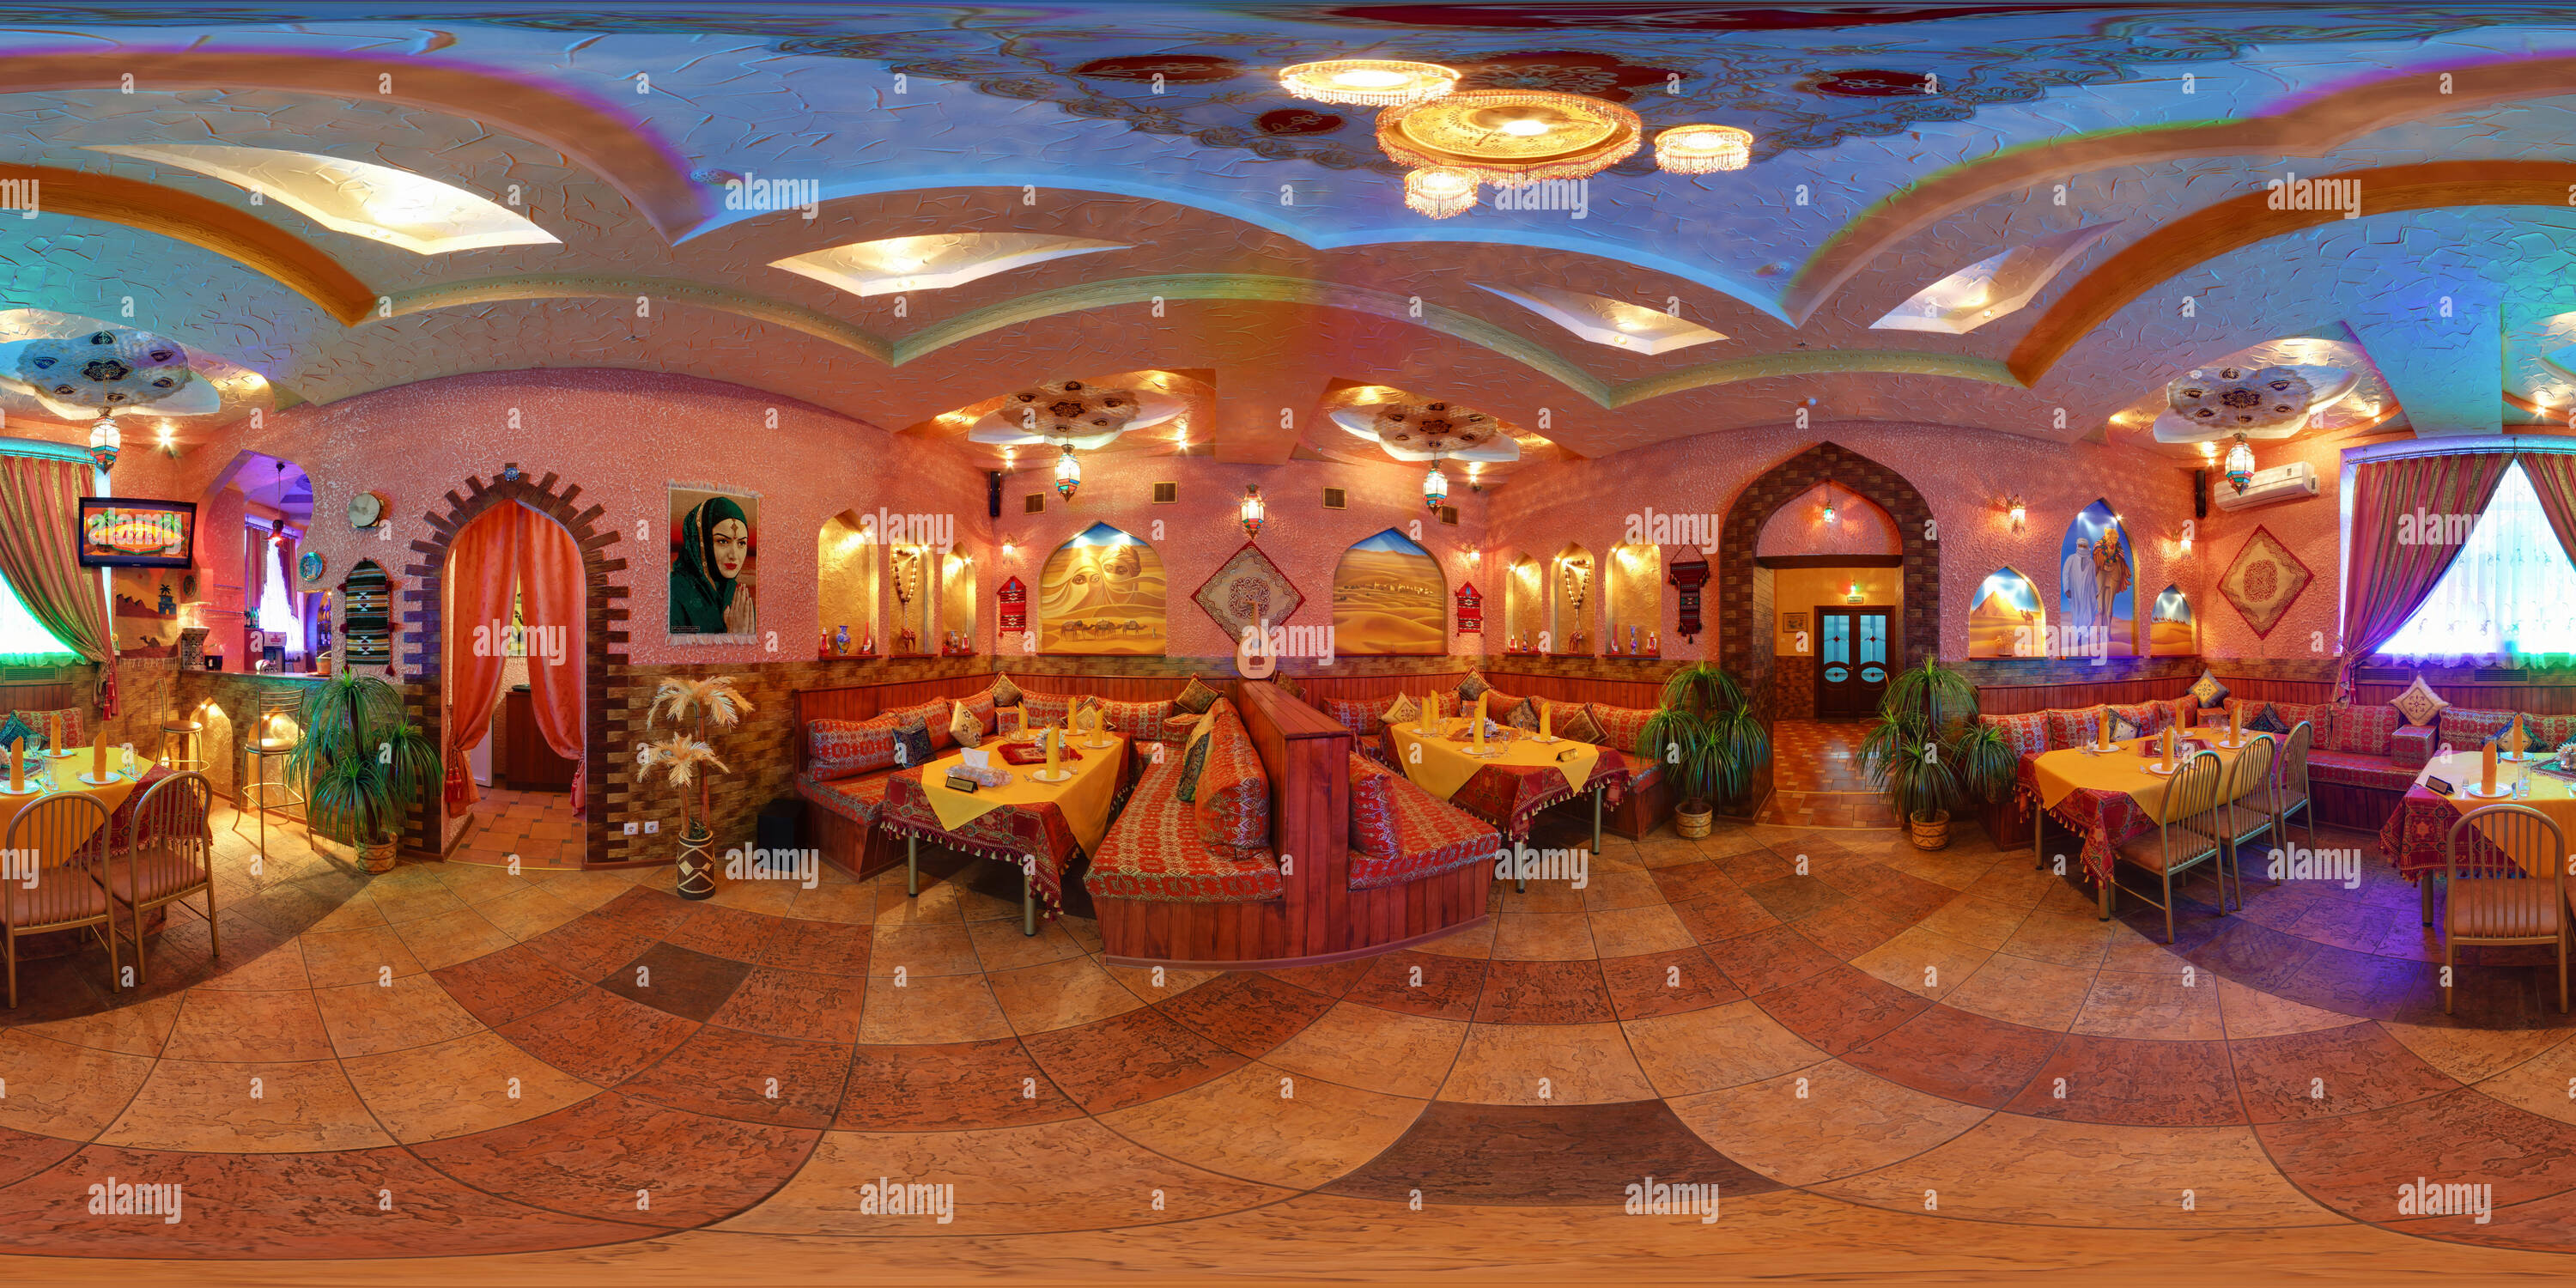 360 degree panoramic view of GRODNO, BELARUS - OCTOBER 12, 2011: Full 360 panorama in equirectangular spherical projection of syrian hookah cafe Sahara